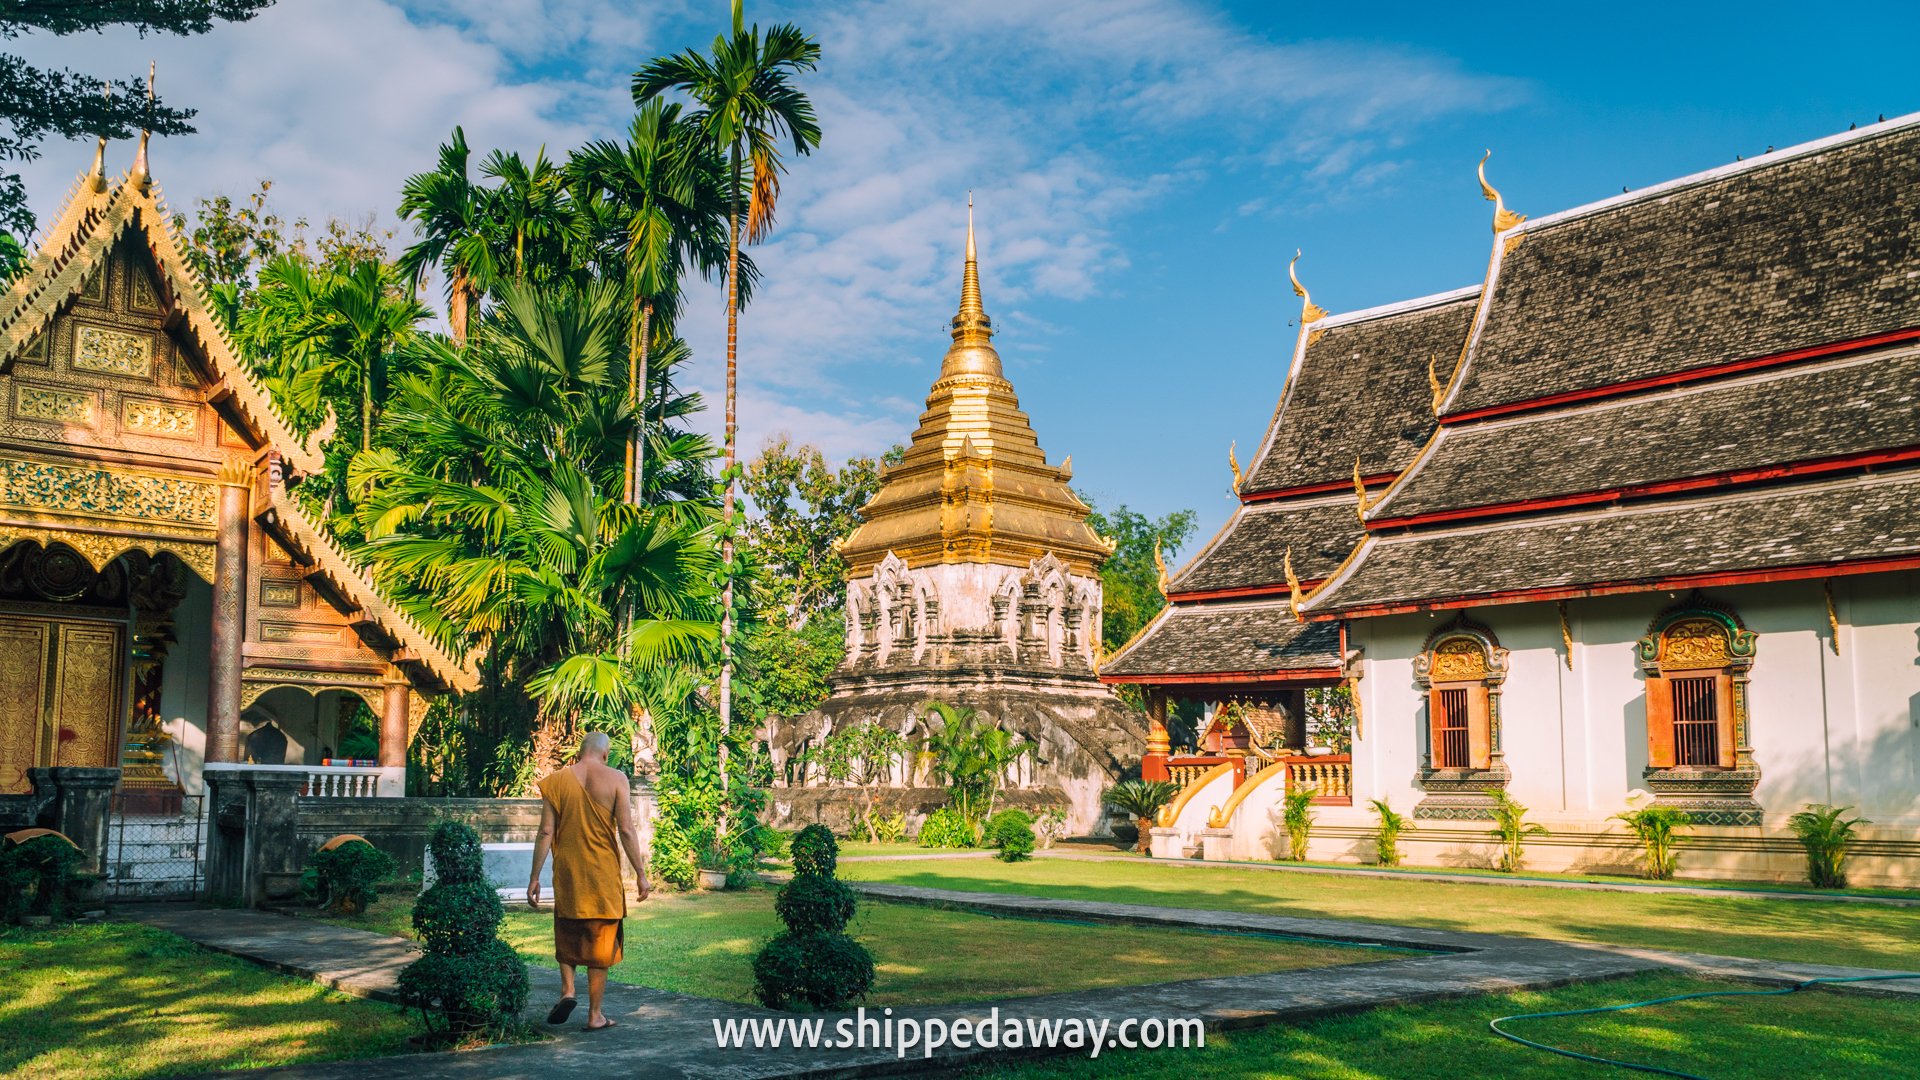 top things to do in Chiang Mai, Chiang Mai attractions - Wat Chiang Man the oldest temple in Chiang Mai - golden chedi